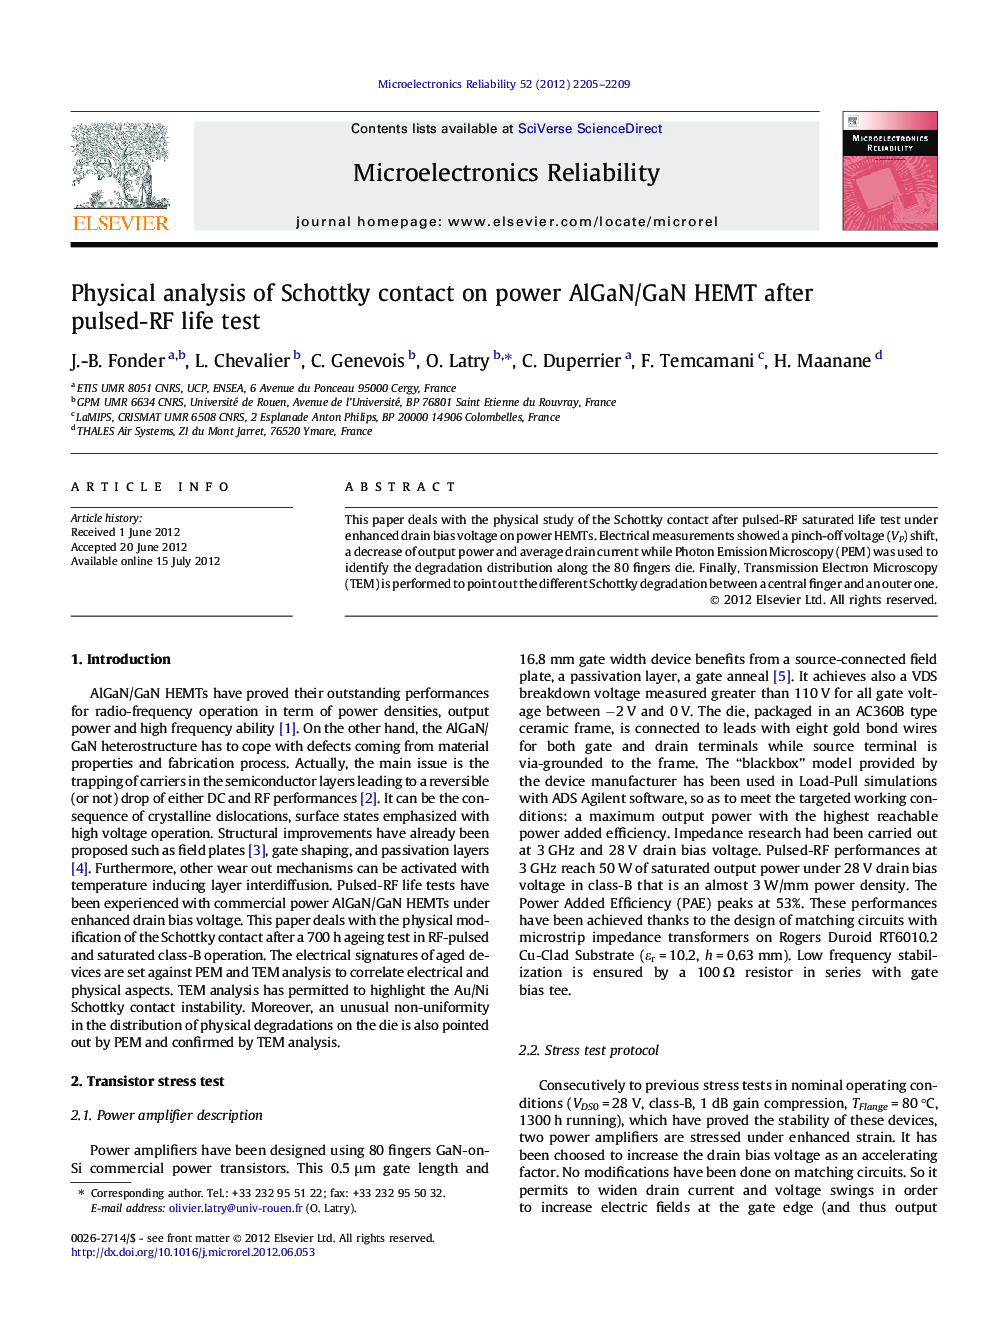 Physical analysis of Schottky contact on power AlGaN/GaN HEMT after pulsed-RF life test